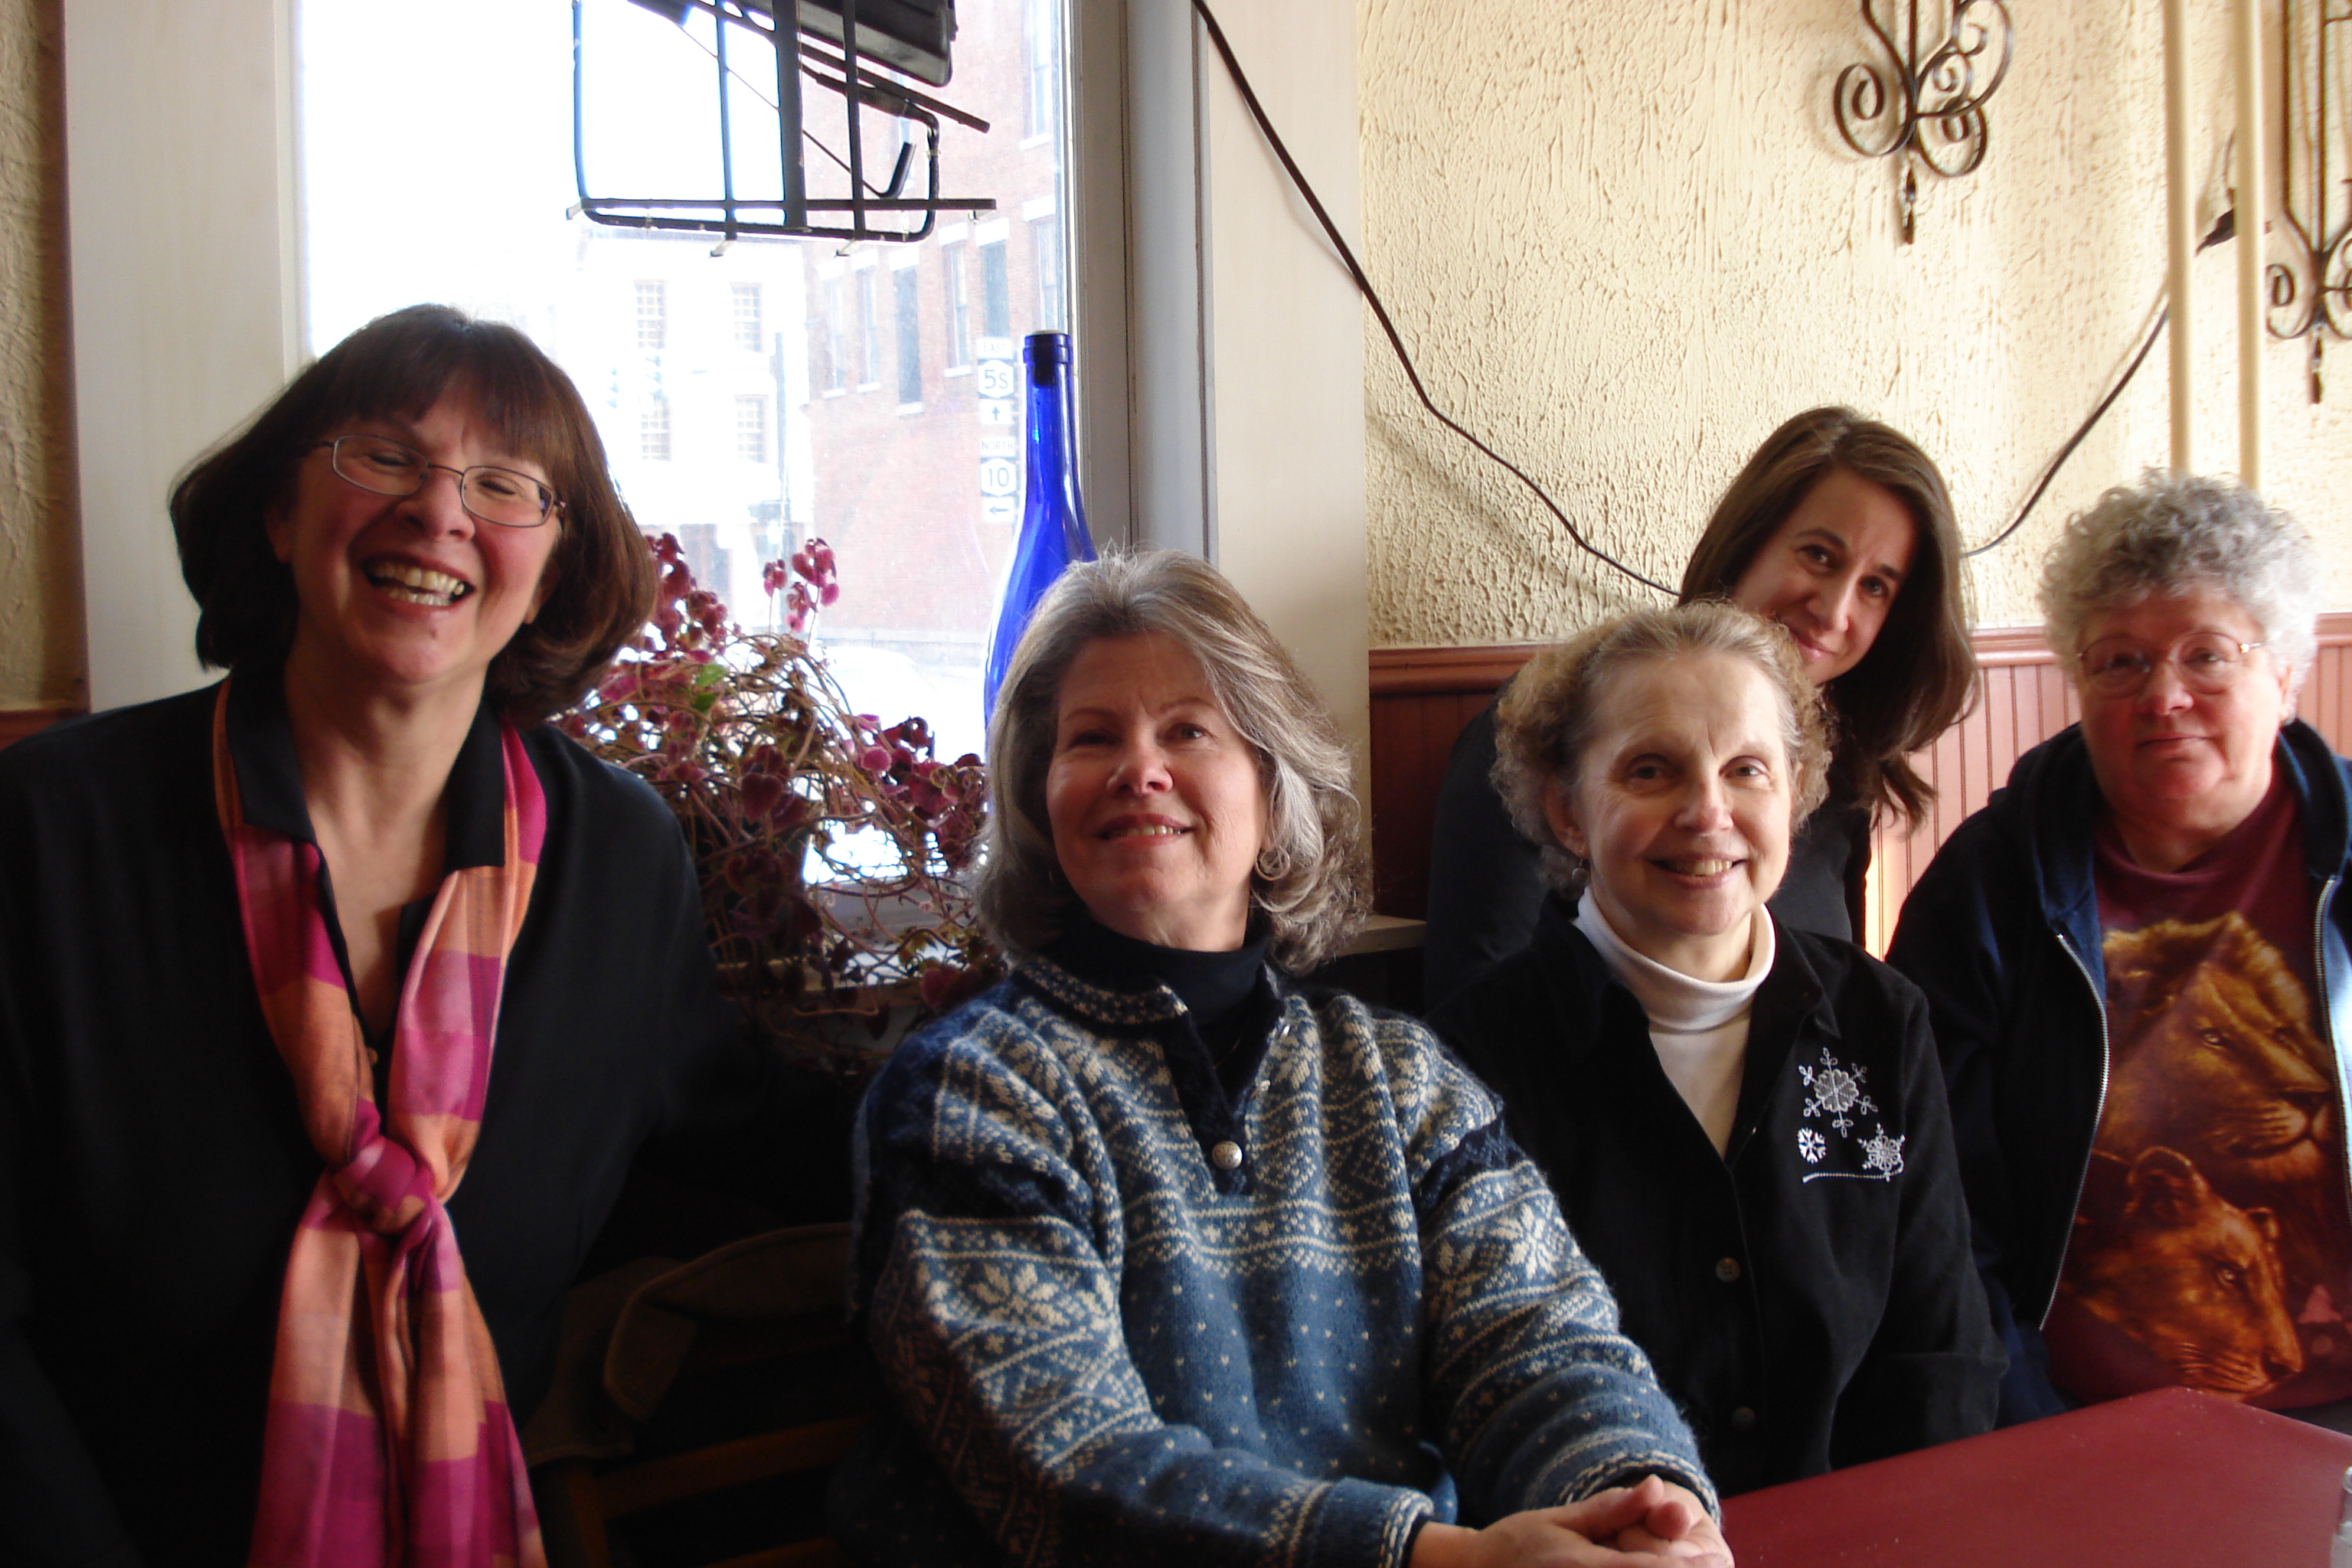 Friday, March 7: The first Maven's Mega-Mile Mystery Lunch in Canajoharie, NY. Good food and wonderful conversation - books, books, books! (L to R): Carol Pouliot, Susan Sundwell, Karen Mollenkopf-Lasher, Jenny Milchman, Angie Hogencamp.